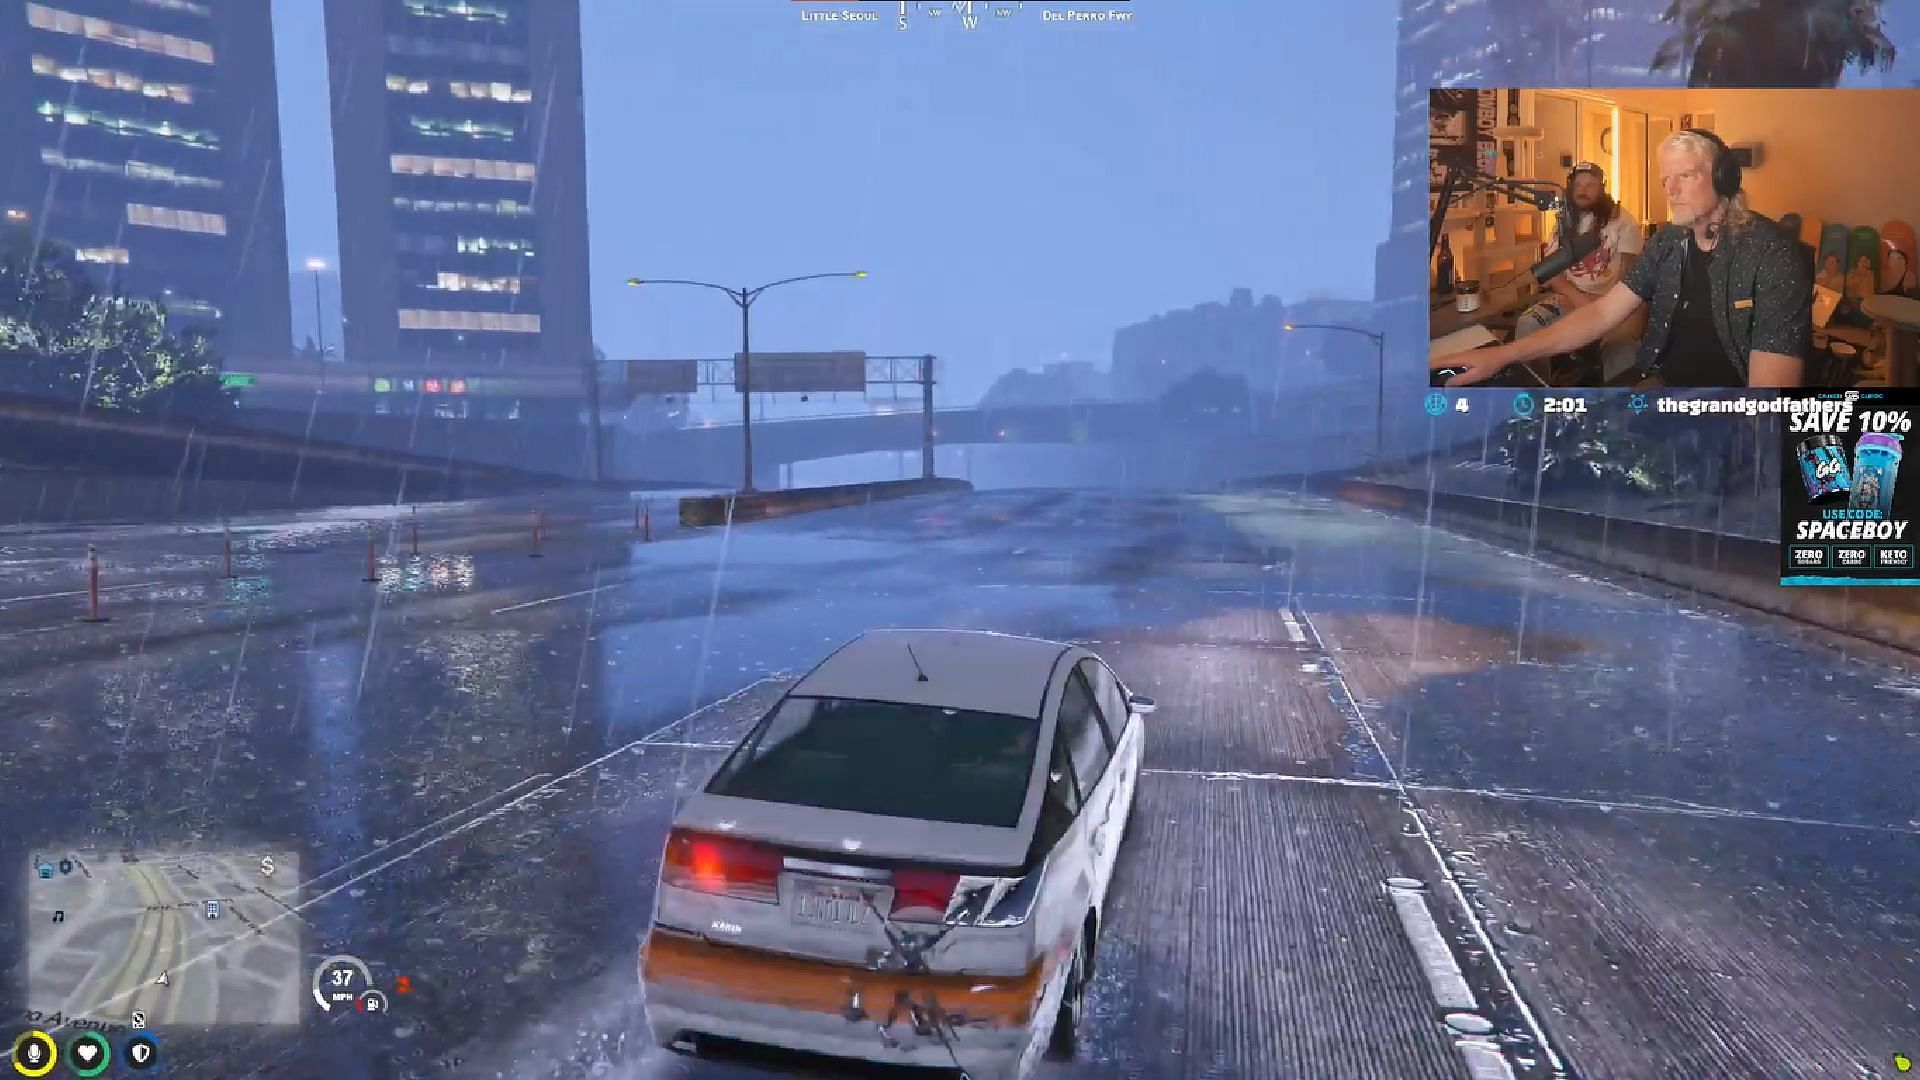 Dan Clancy takes on some GTA RP heckling (Image via Spaceboy/Twitch)